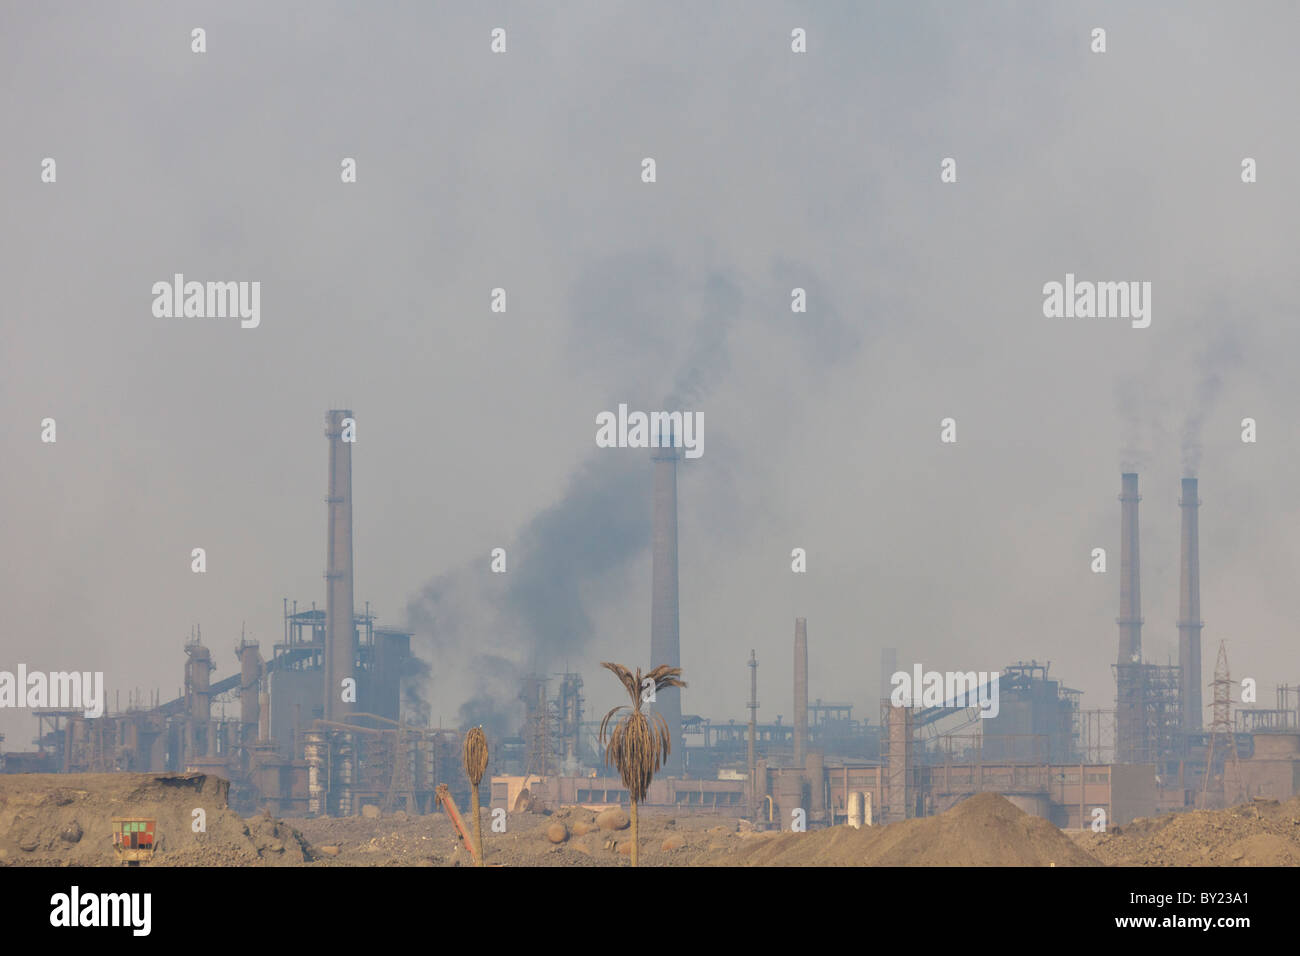 factories pouring out polluted smoke, Helwan, Cairo, Egypt Stock Photo